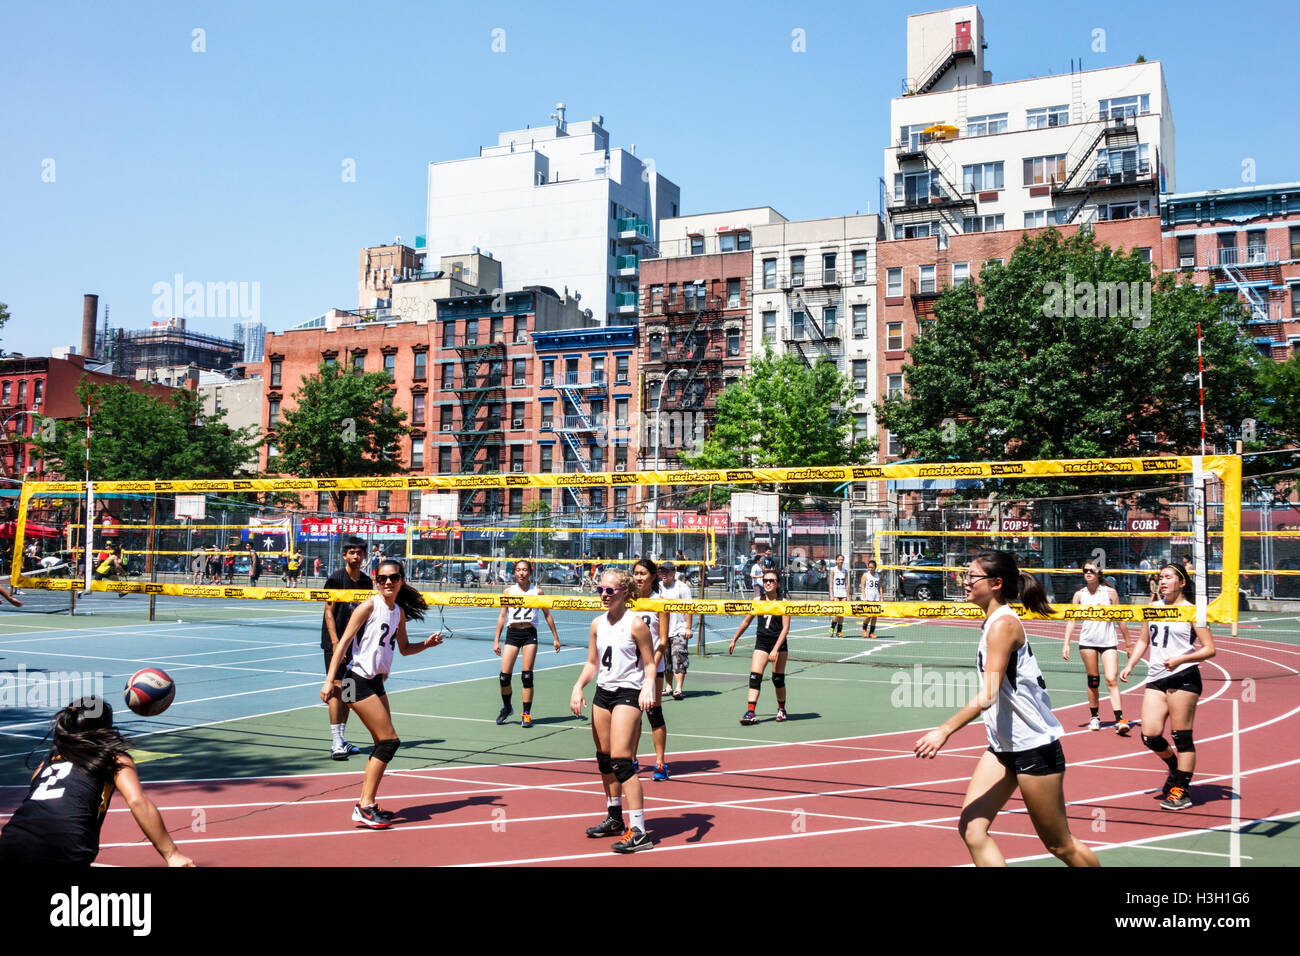 New York City,NY NYC,Lower Manhattan,Chinatown,Seward Park,public park,athletic field,recreational sports,Mini Volleyball Tournament,volleyball,court, Stock Photo